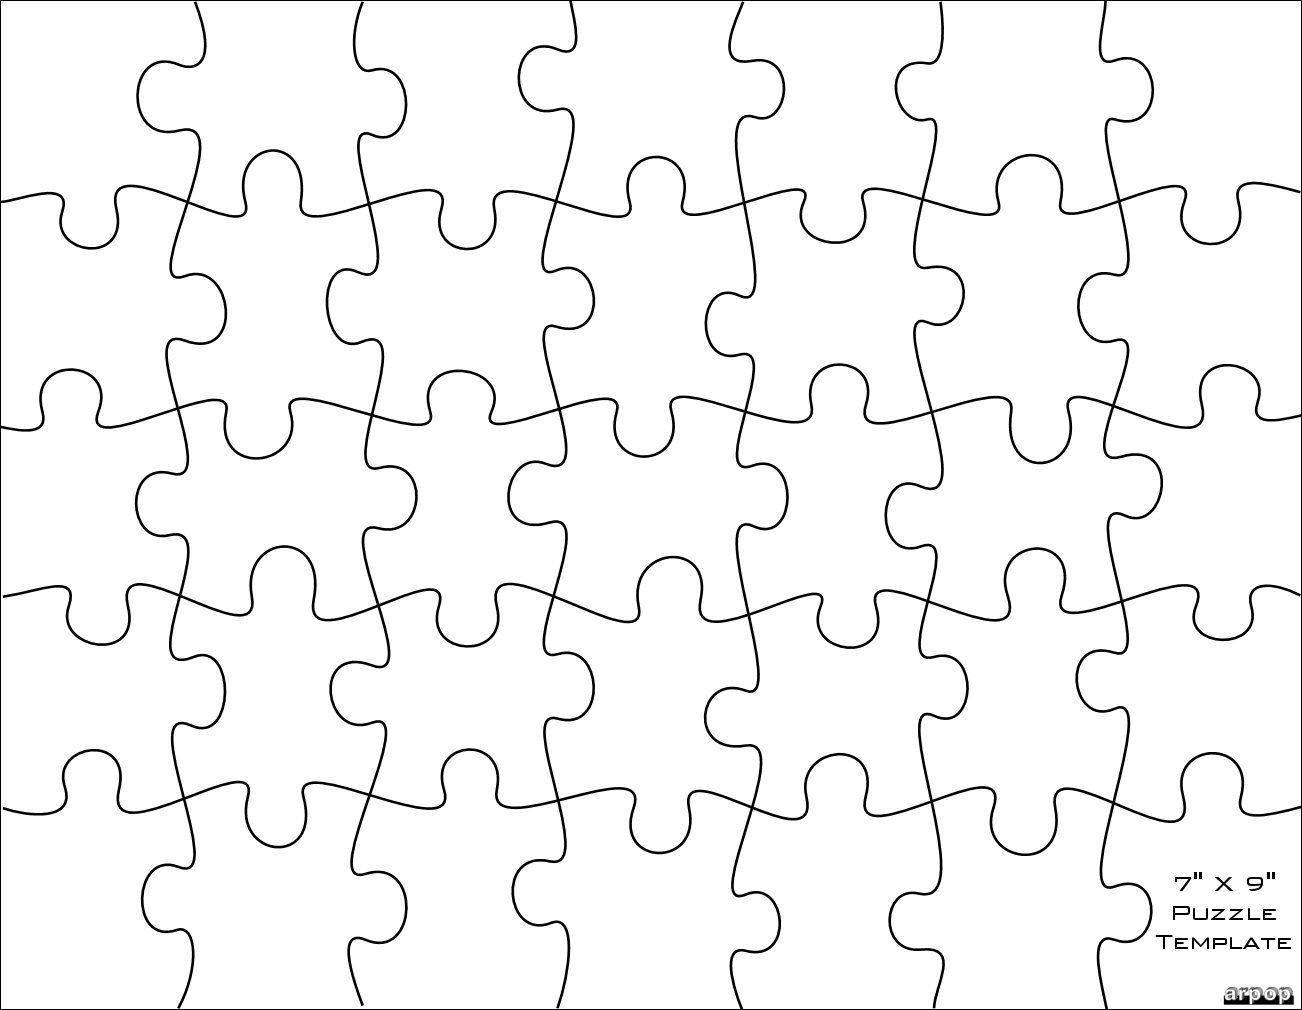 Free Scroll Saw Patternsarpop: Jigsaw Puzzle Templates | Middle - Printable Jigsaw Puzzles For Middle School